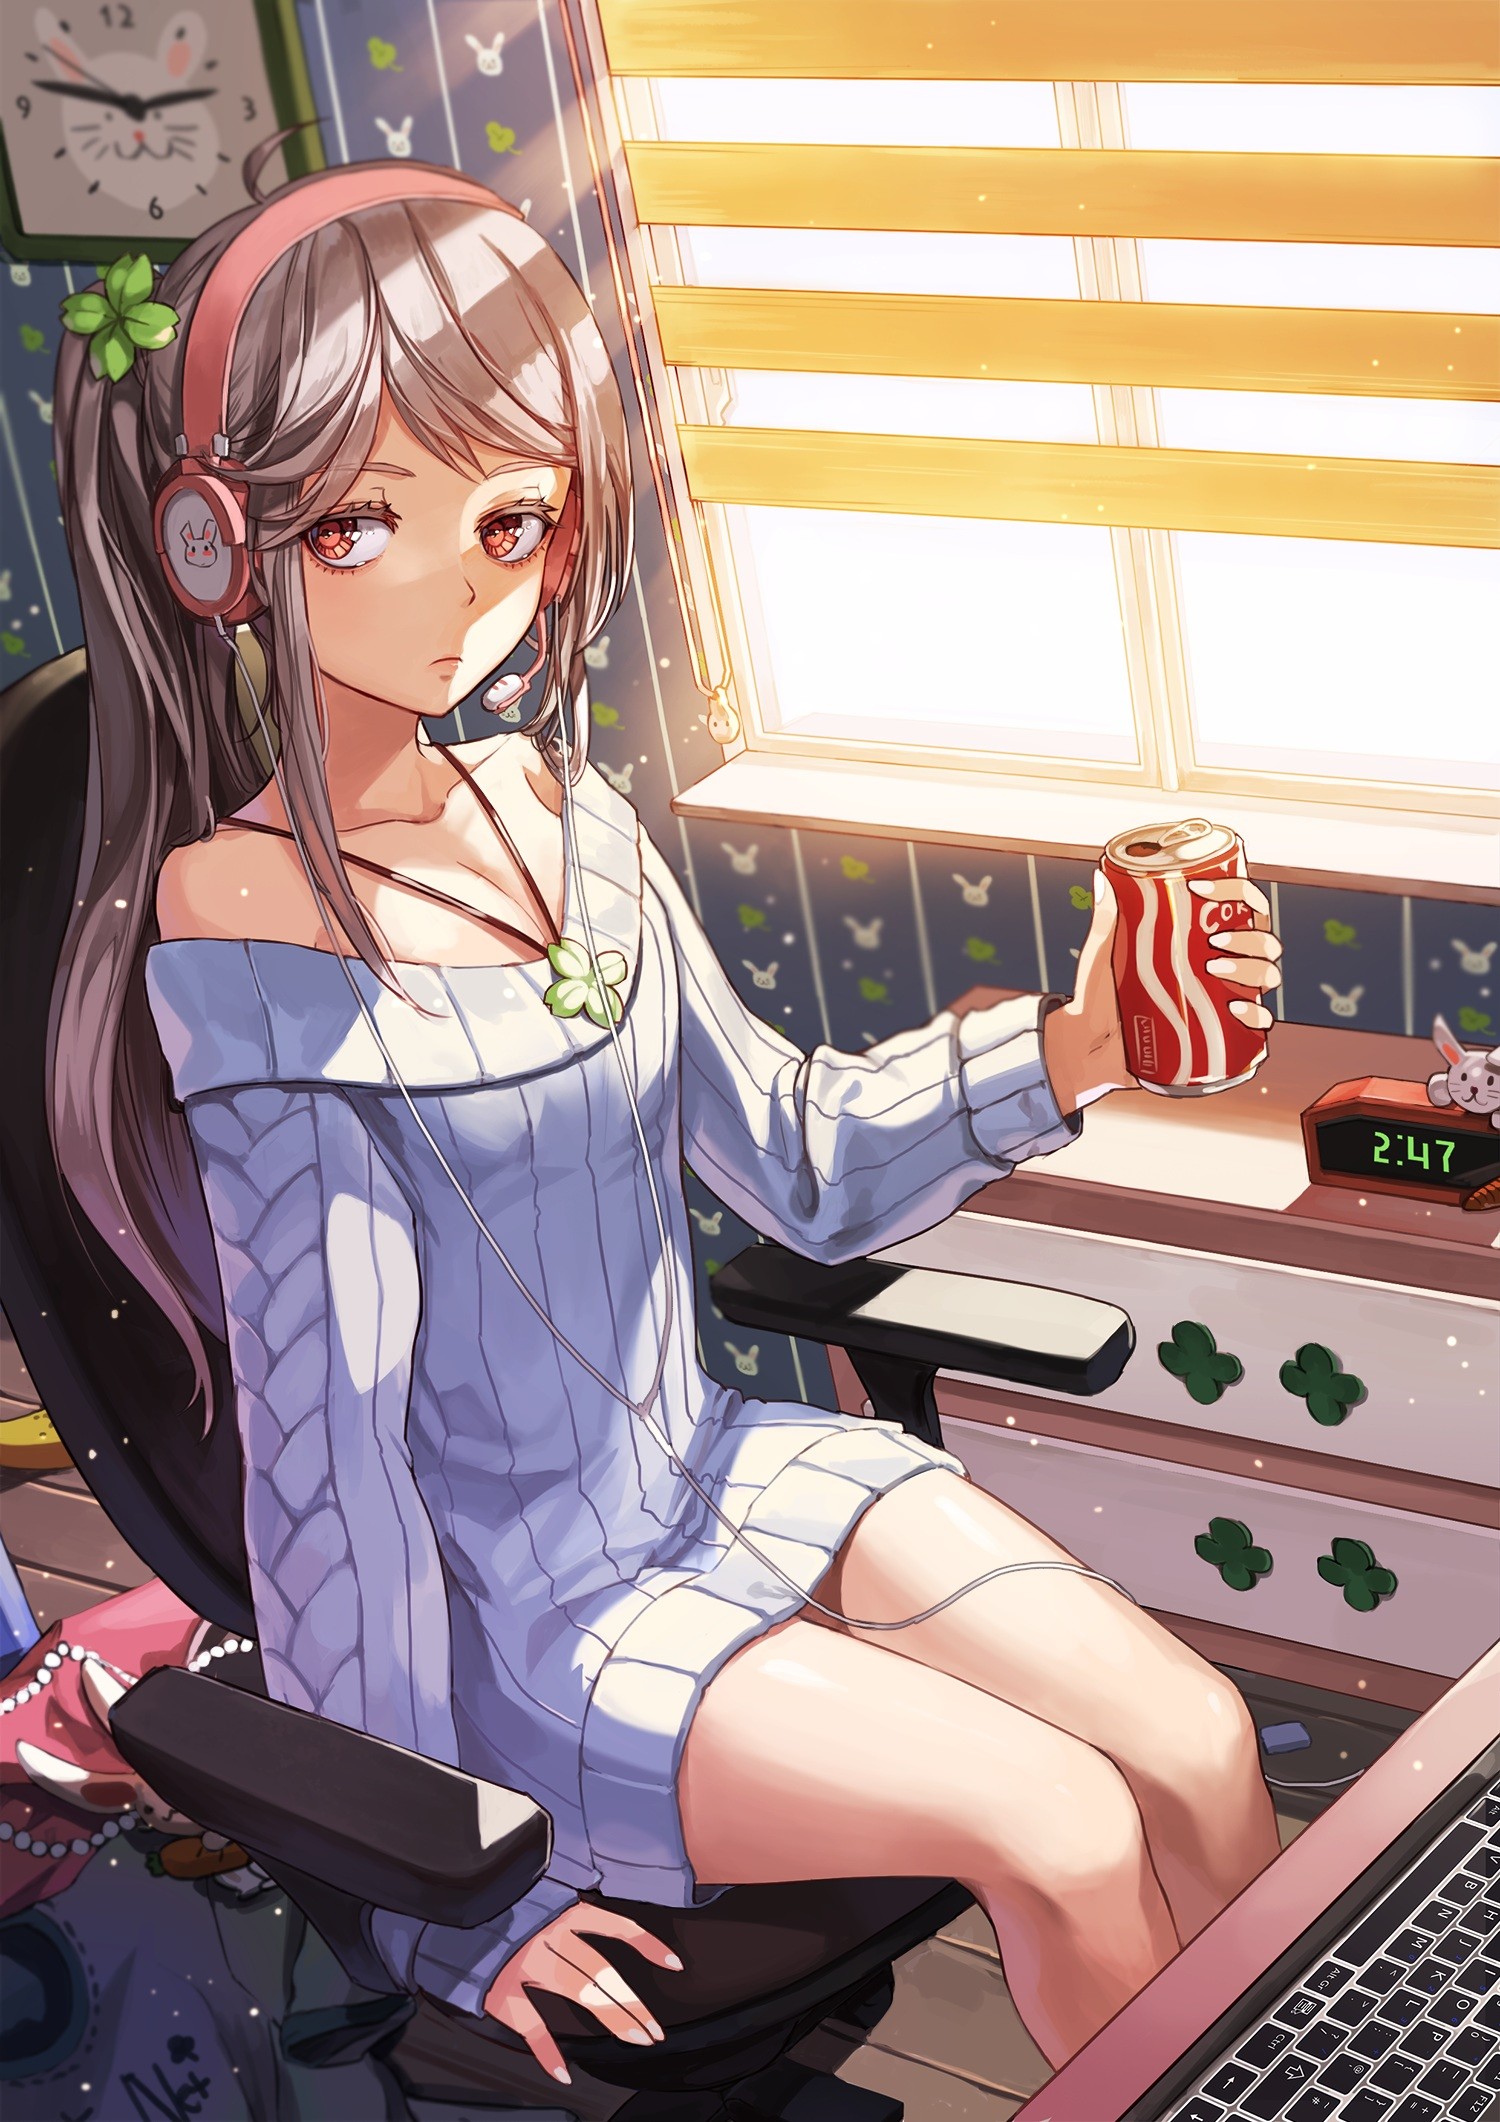 Anime 1500x2122 anime anime girls long hair cleavage headphones sweater can women indoors clocks alarm clock sitting looking away thighs together Pixiv